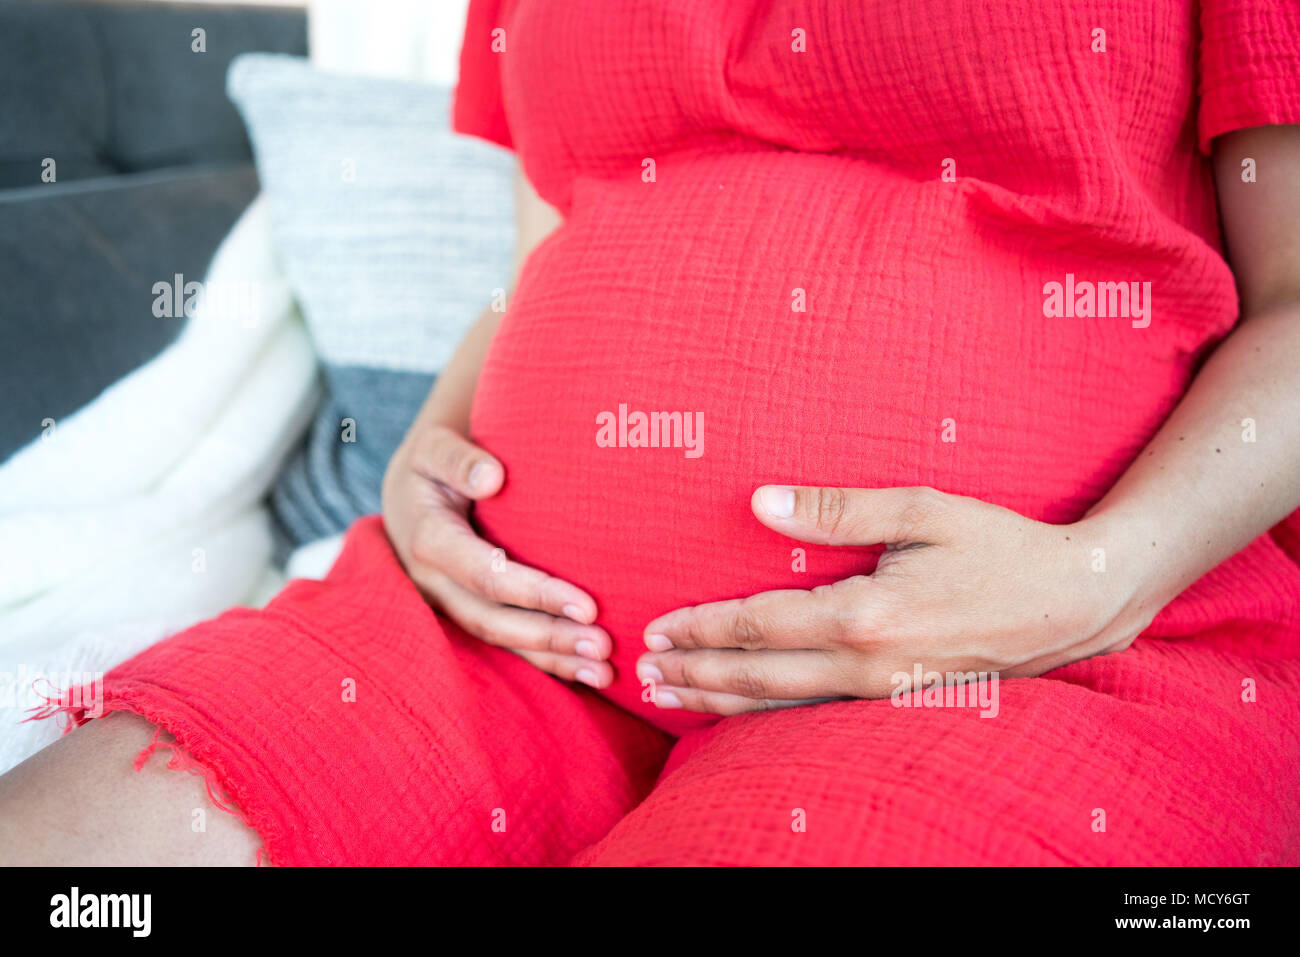 Midsection of pregnant woman sitting on couch and holding her pregnant belly Stock Photo